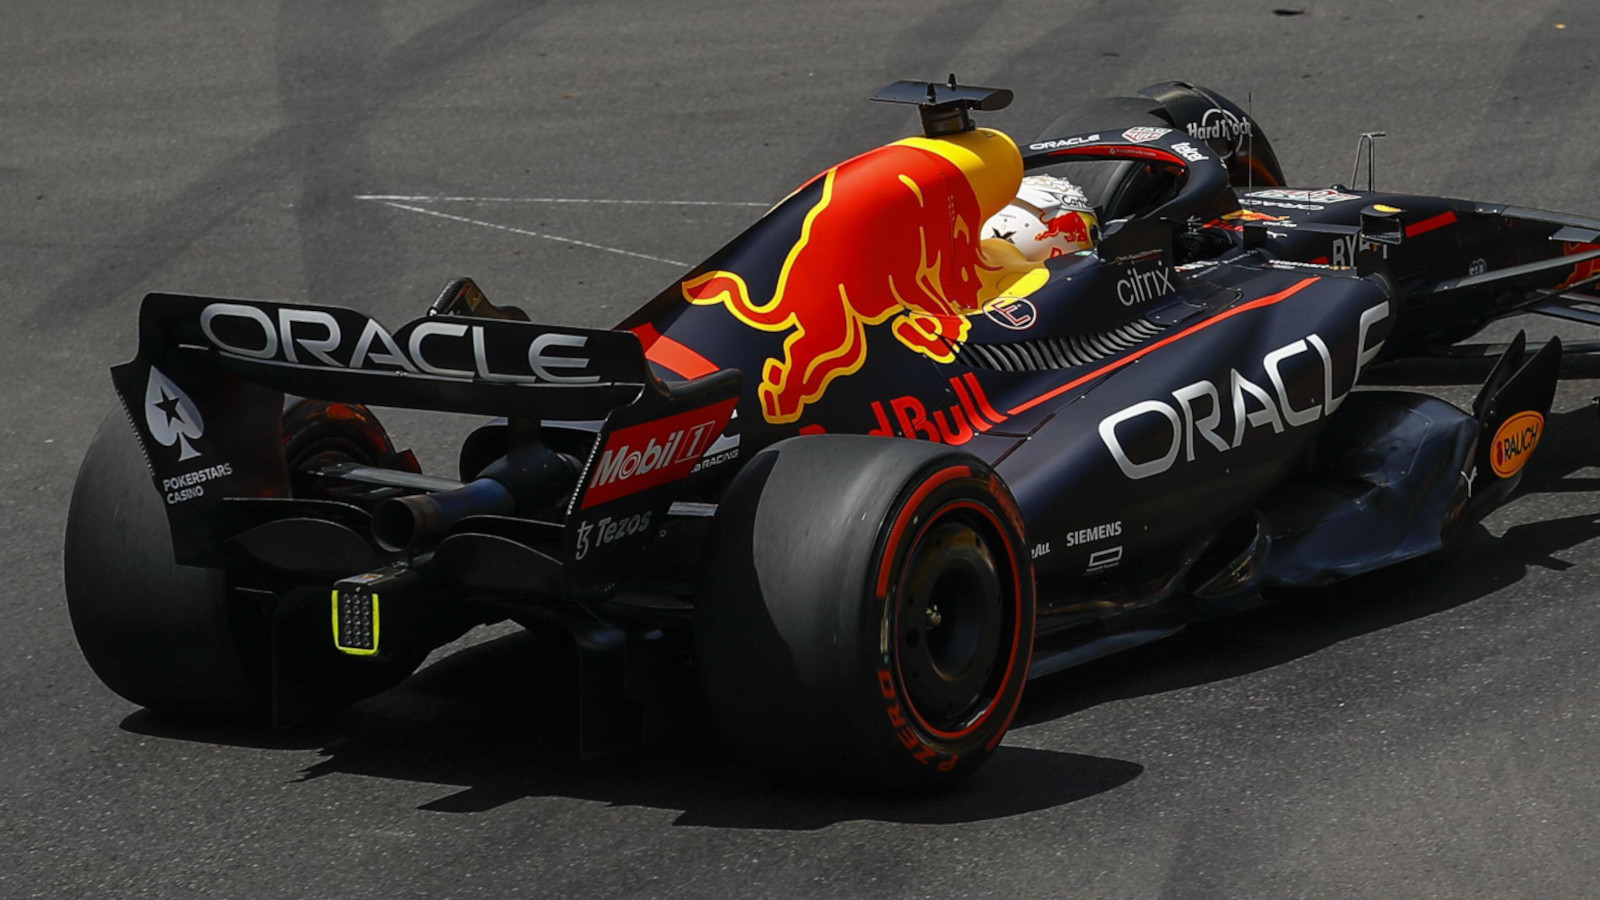 Max Verstappen's Red Bull from behind. Monaco May 2022